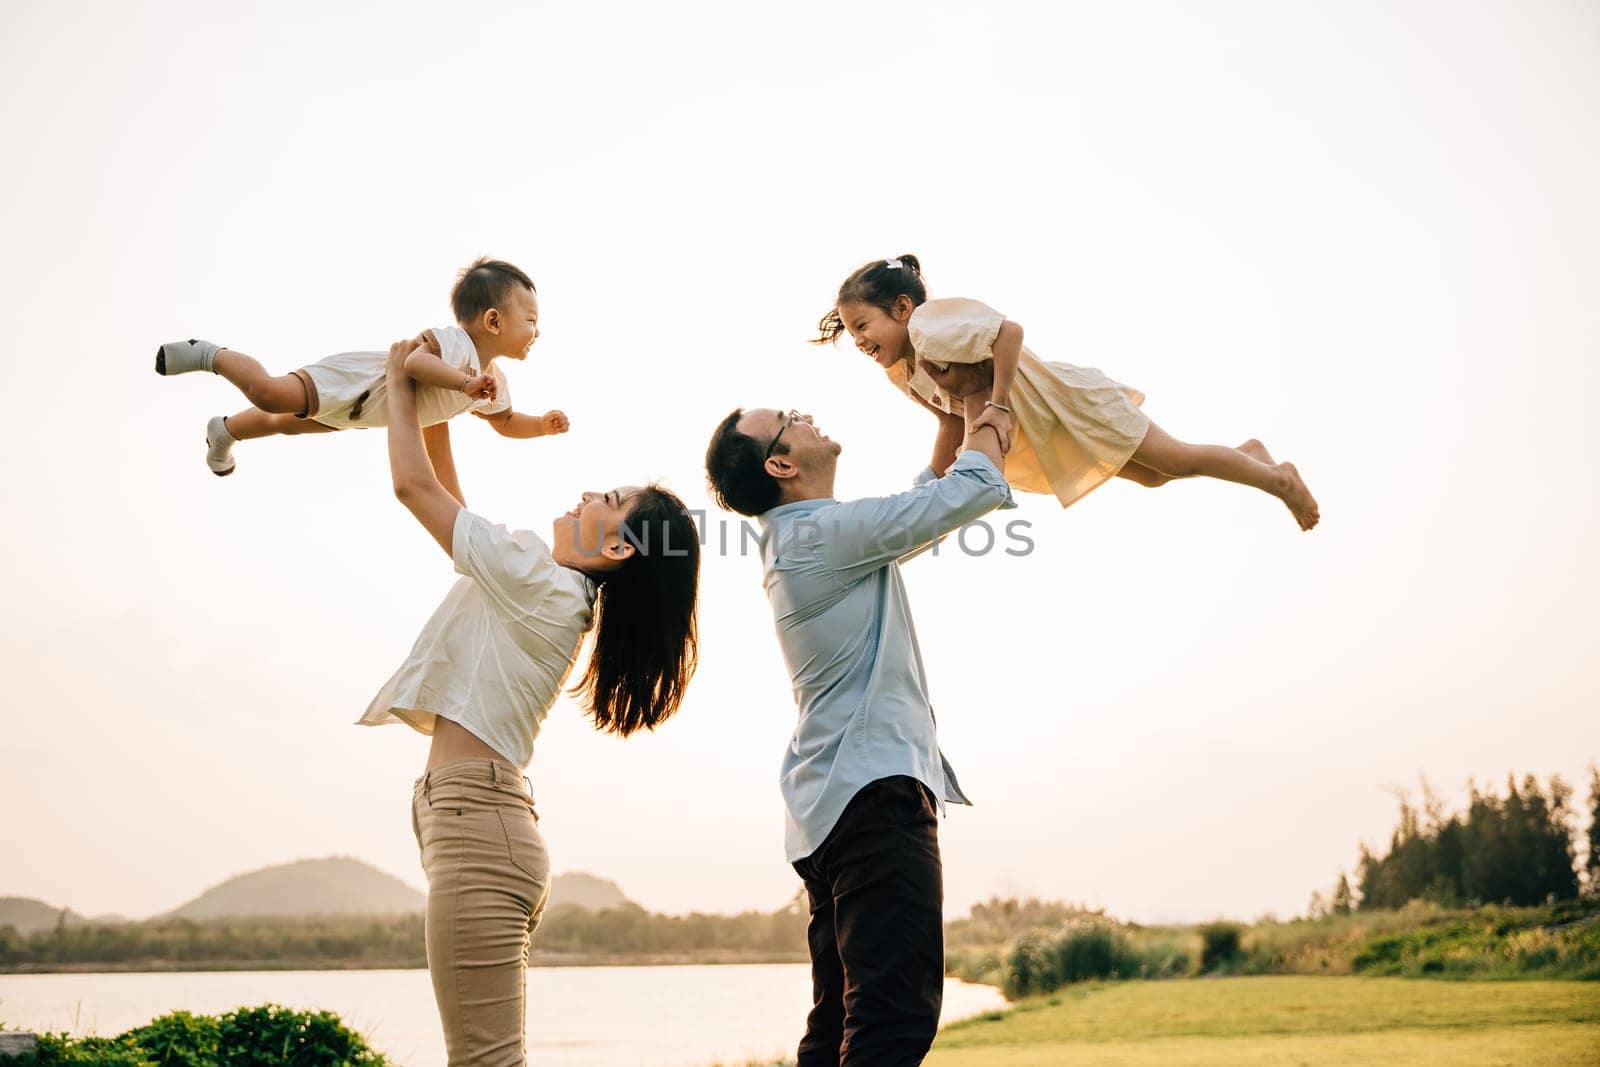 On a tropical vacation, a happy couple enjoys a moment of playful fun, as the father and mother throw their baby up in the air against a beautiful sunset sky. family enjoys a carefree vacation moment